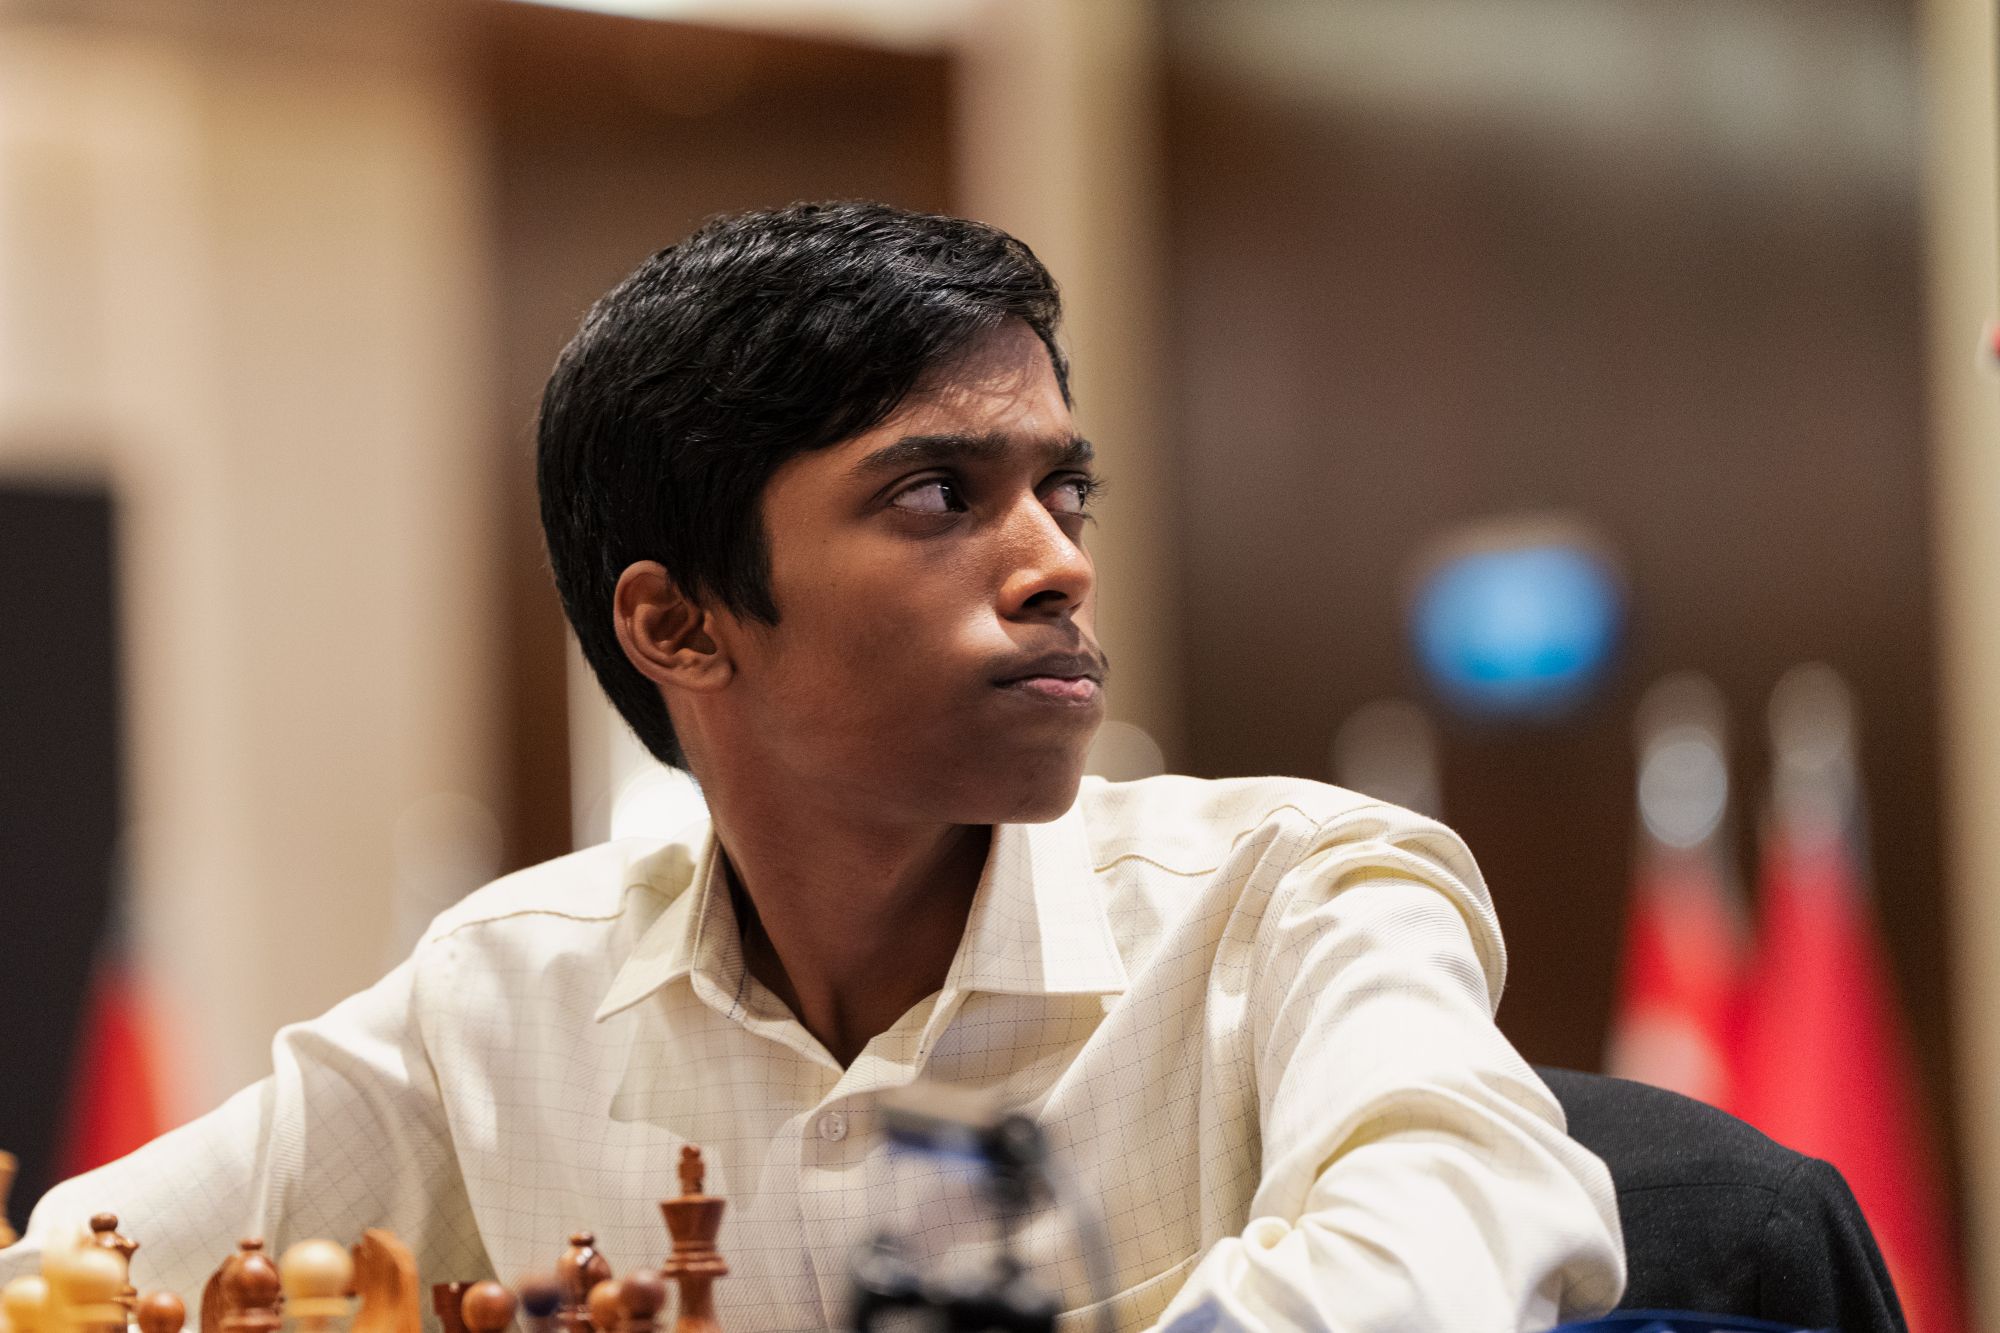 Top 10 Indian Chess Players 